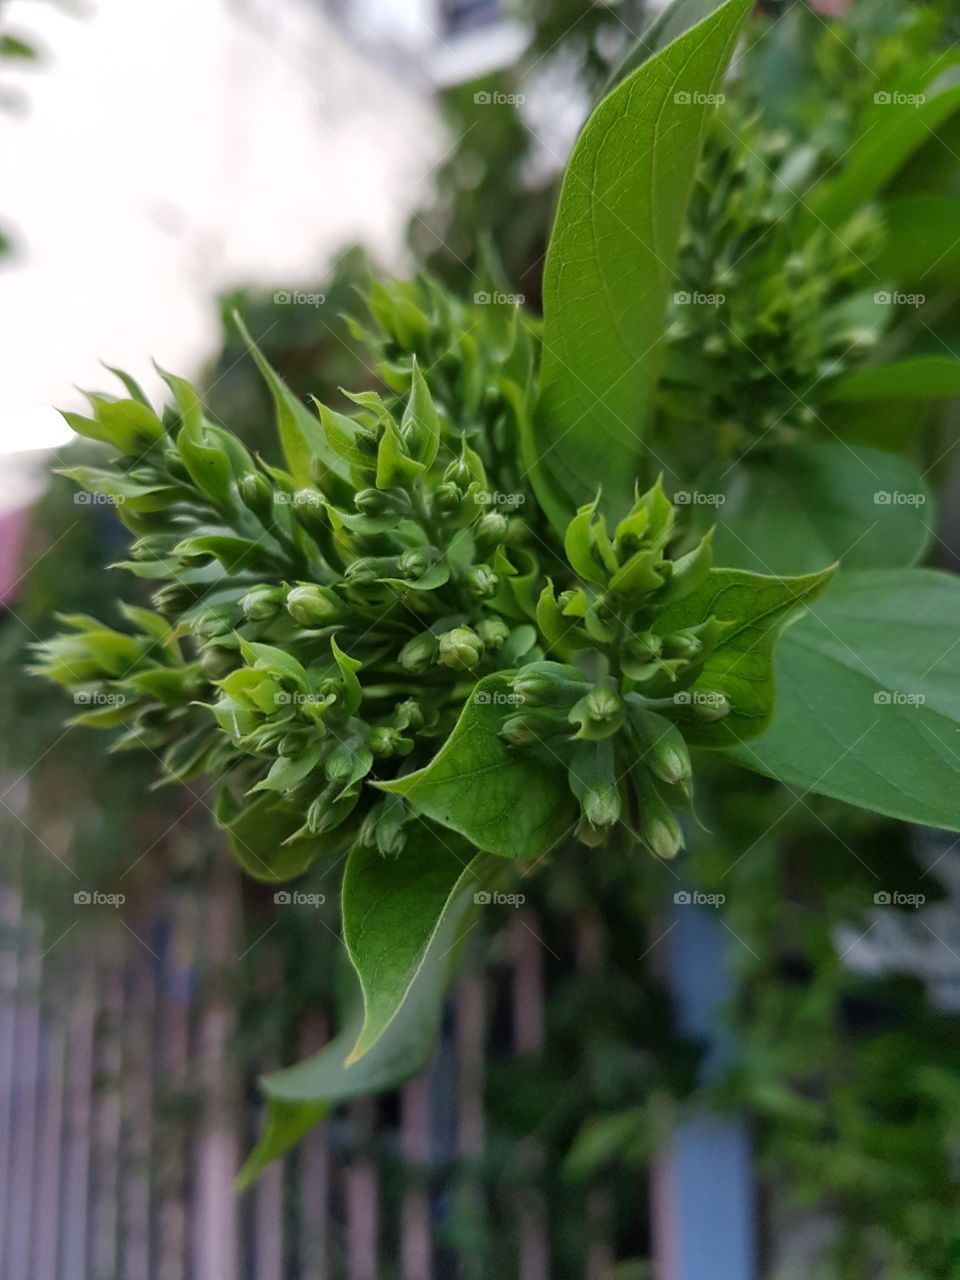 clusters of green